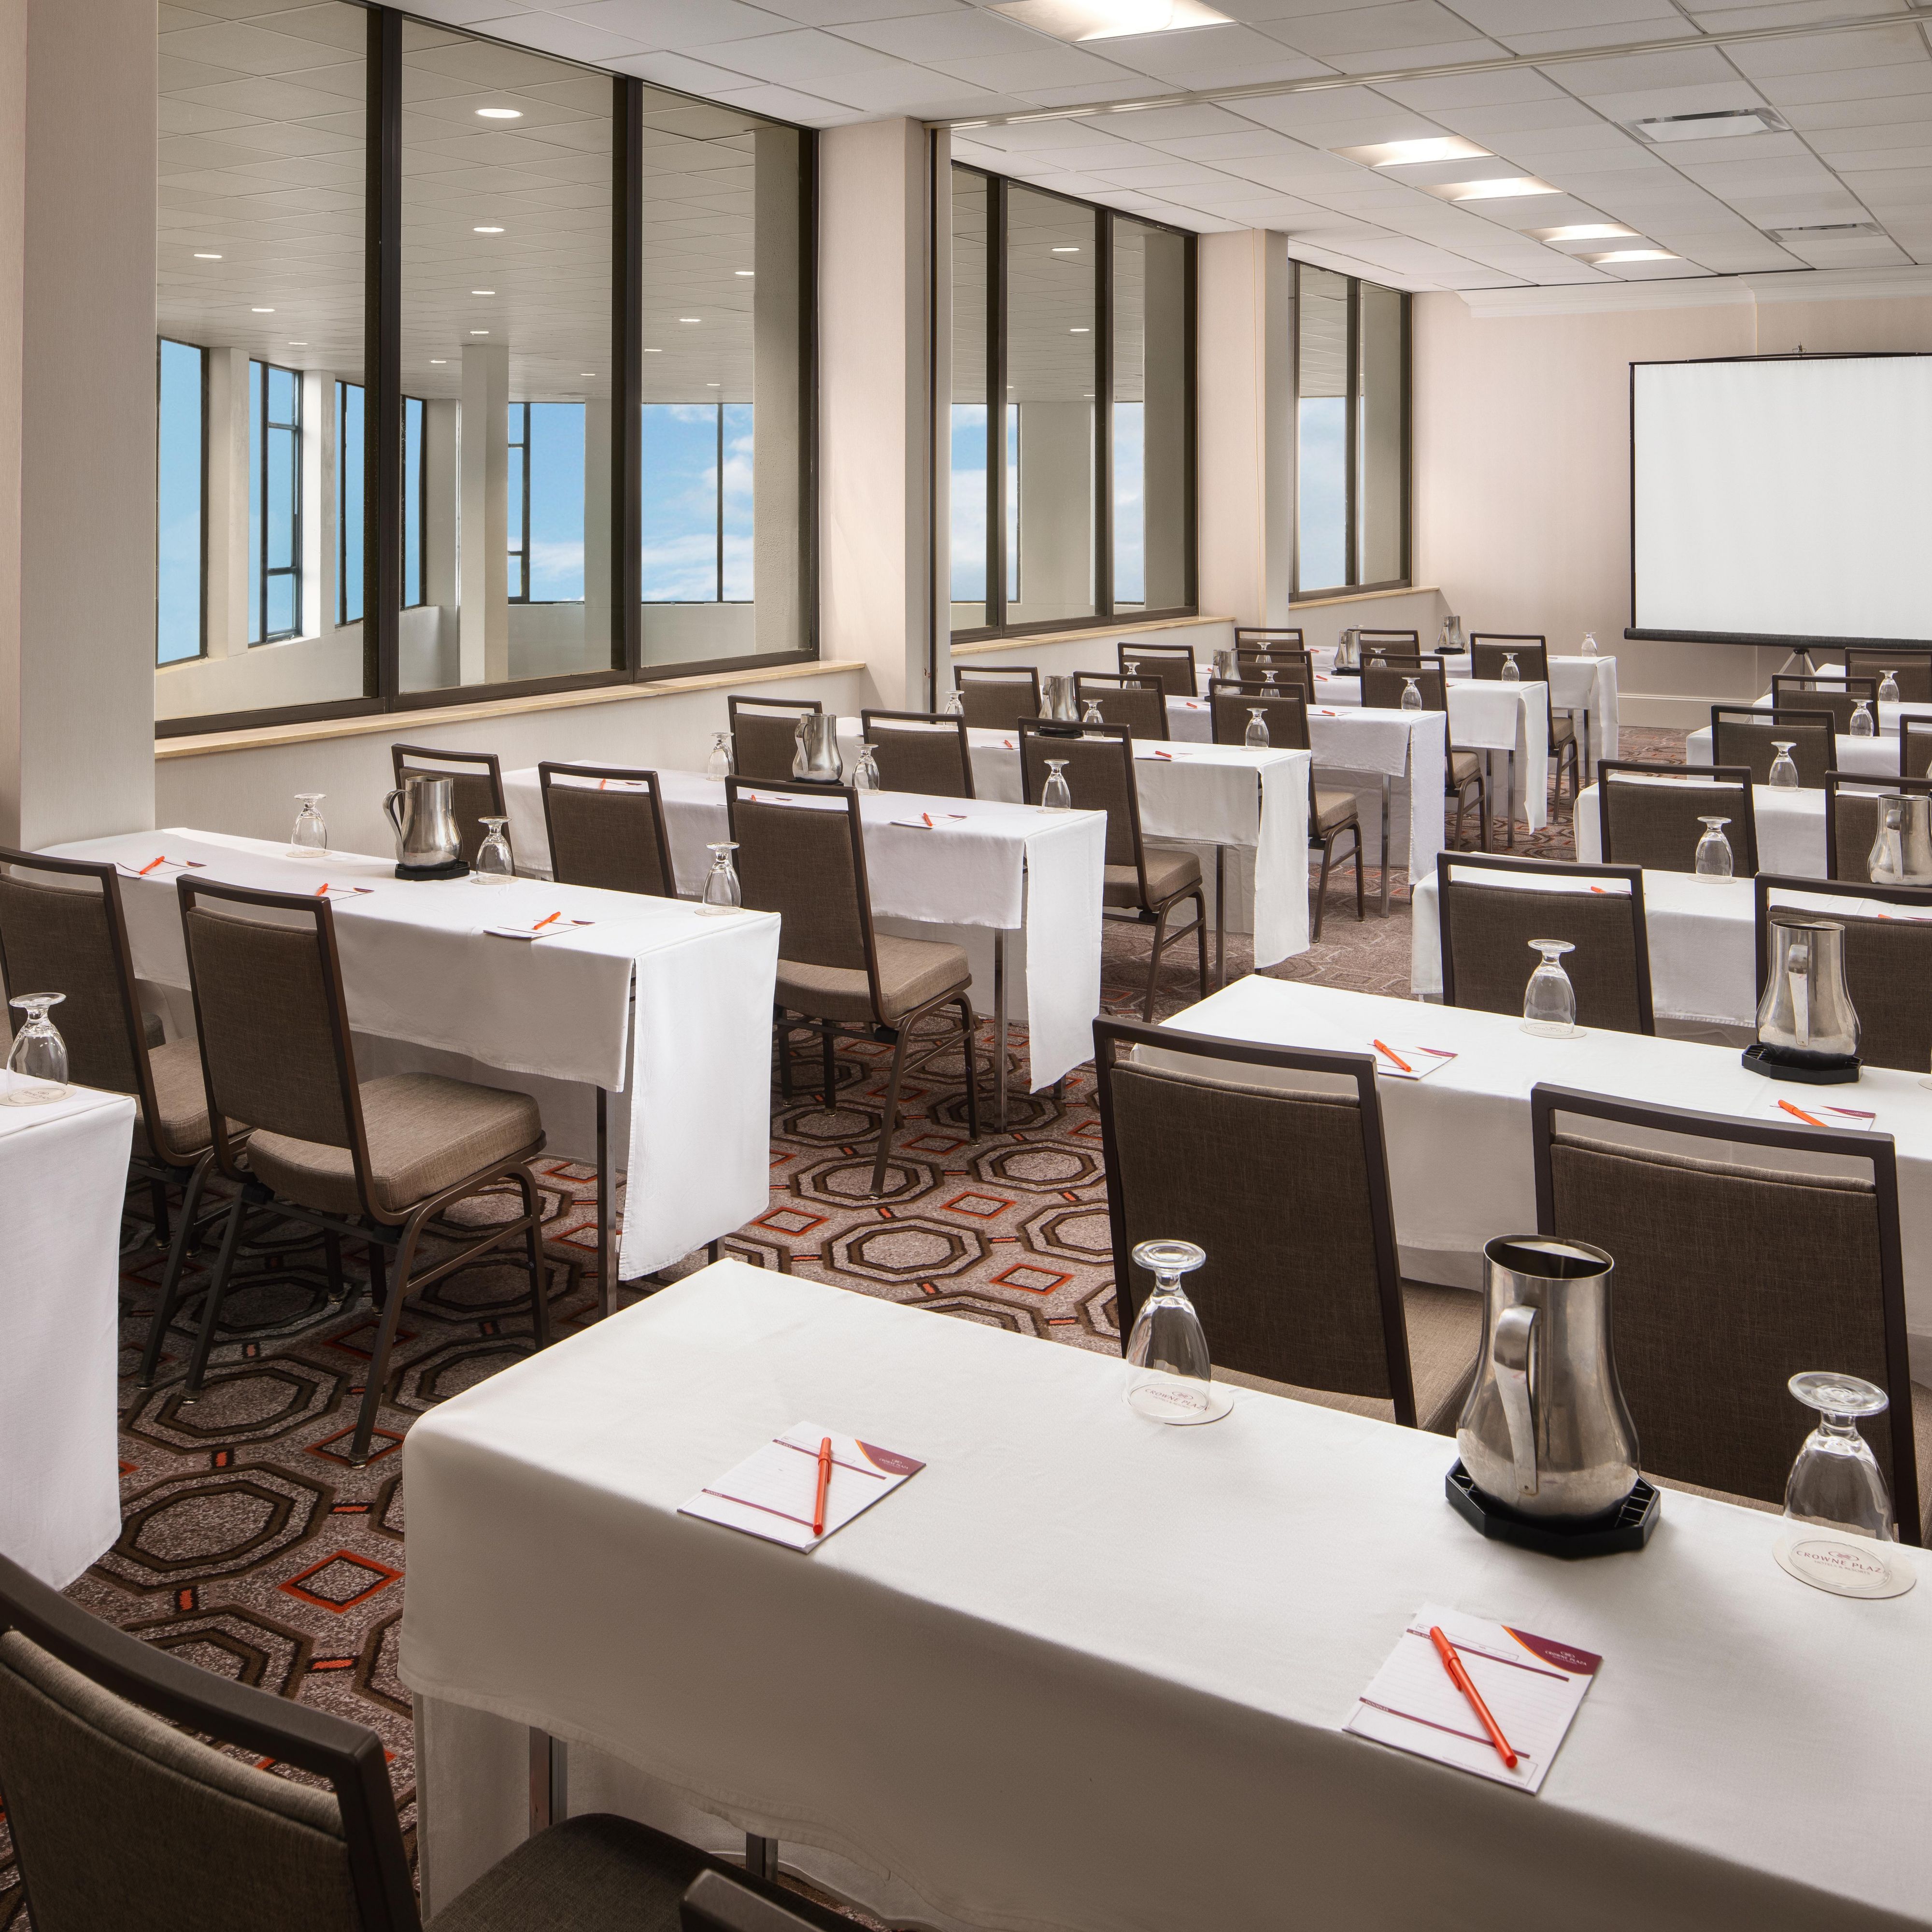 Bright windows and LED lighting set the scene for meetings.